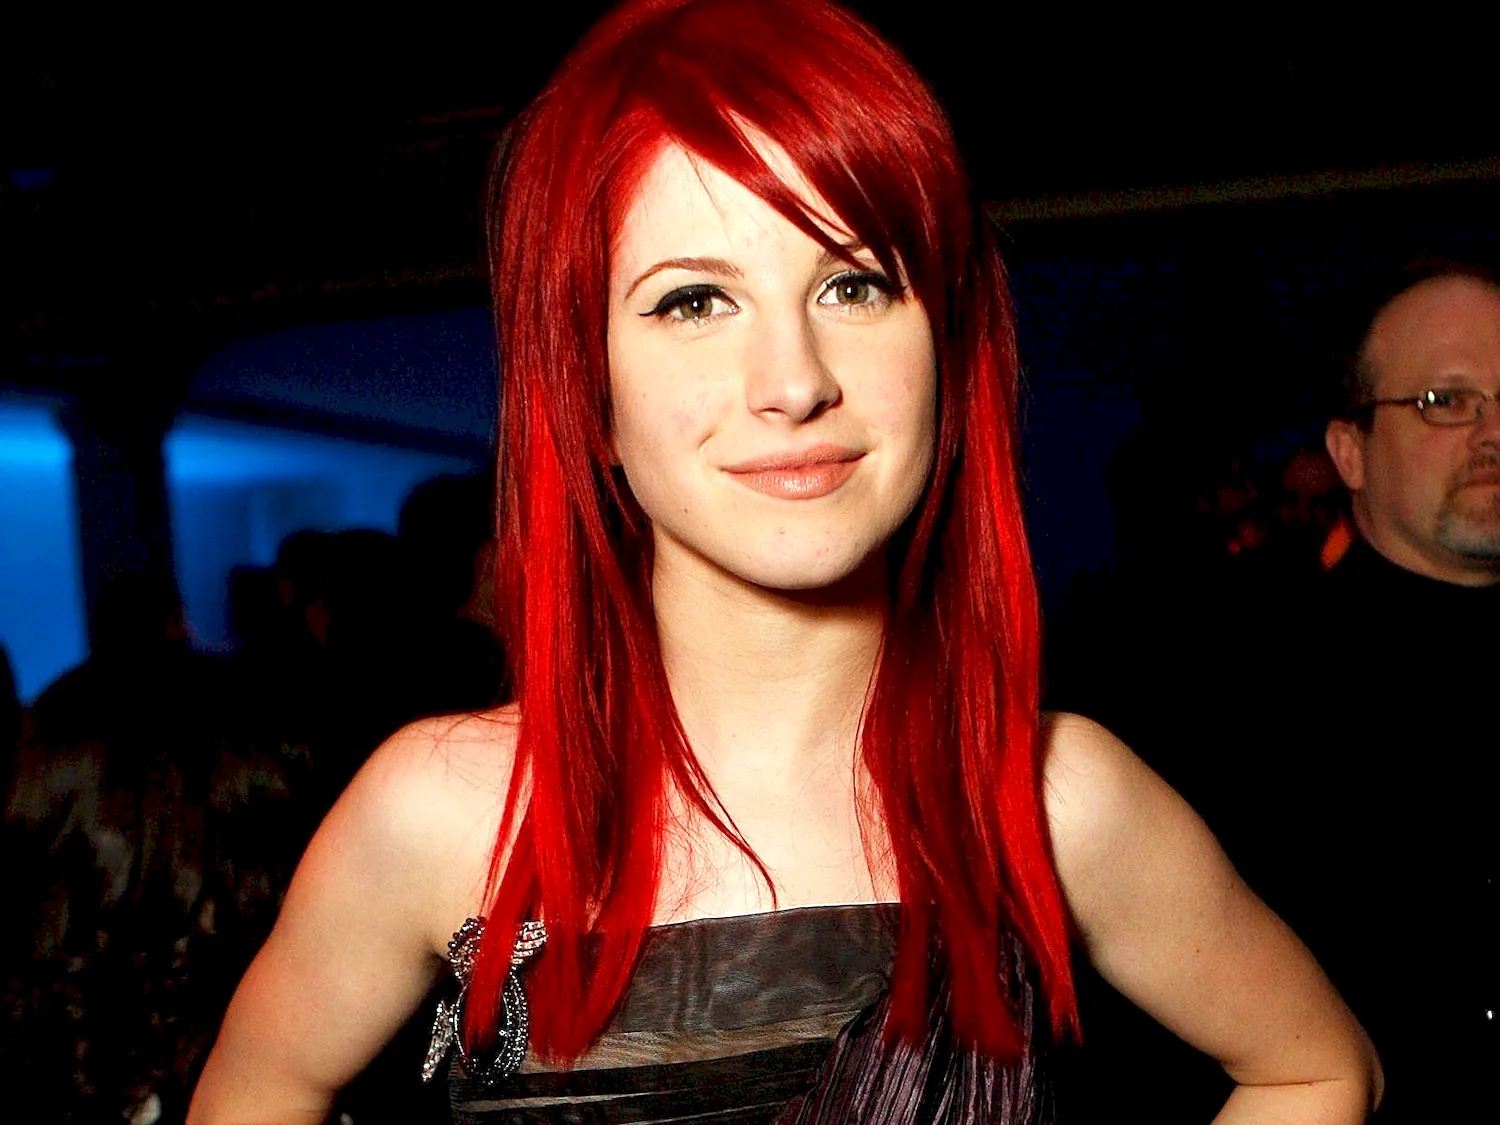 Hayley Williams 18 years old